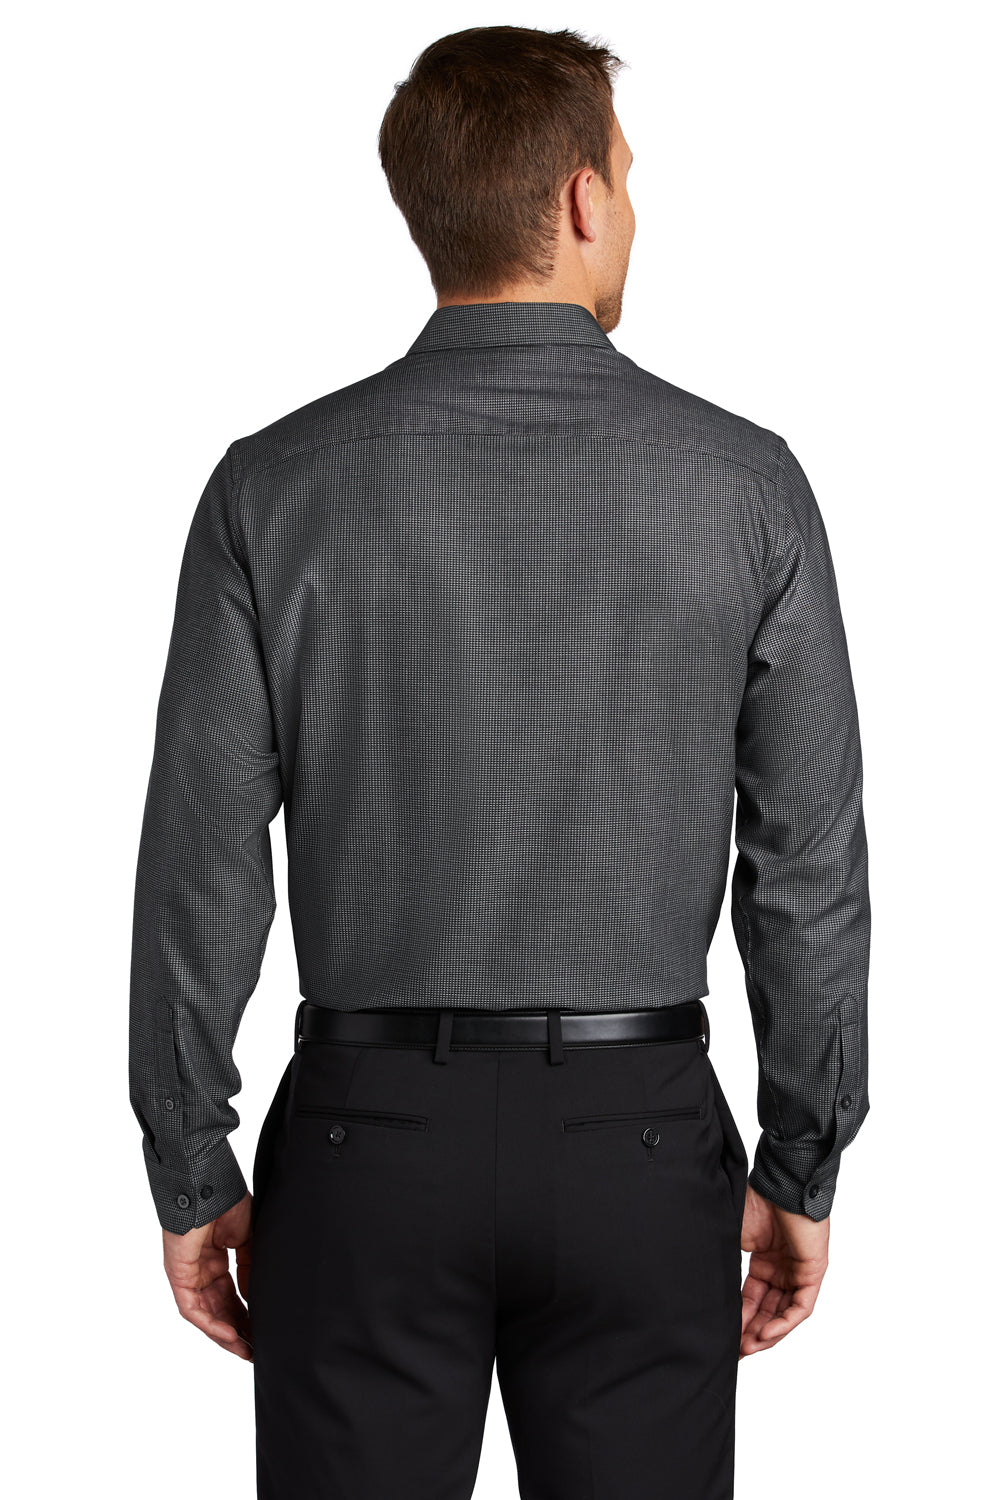 Port Authority Mens Pincheck Long Sleeve Button Down Shirt Black/Steel Grey Side